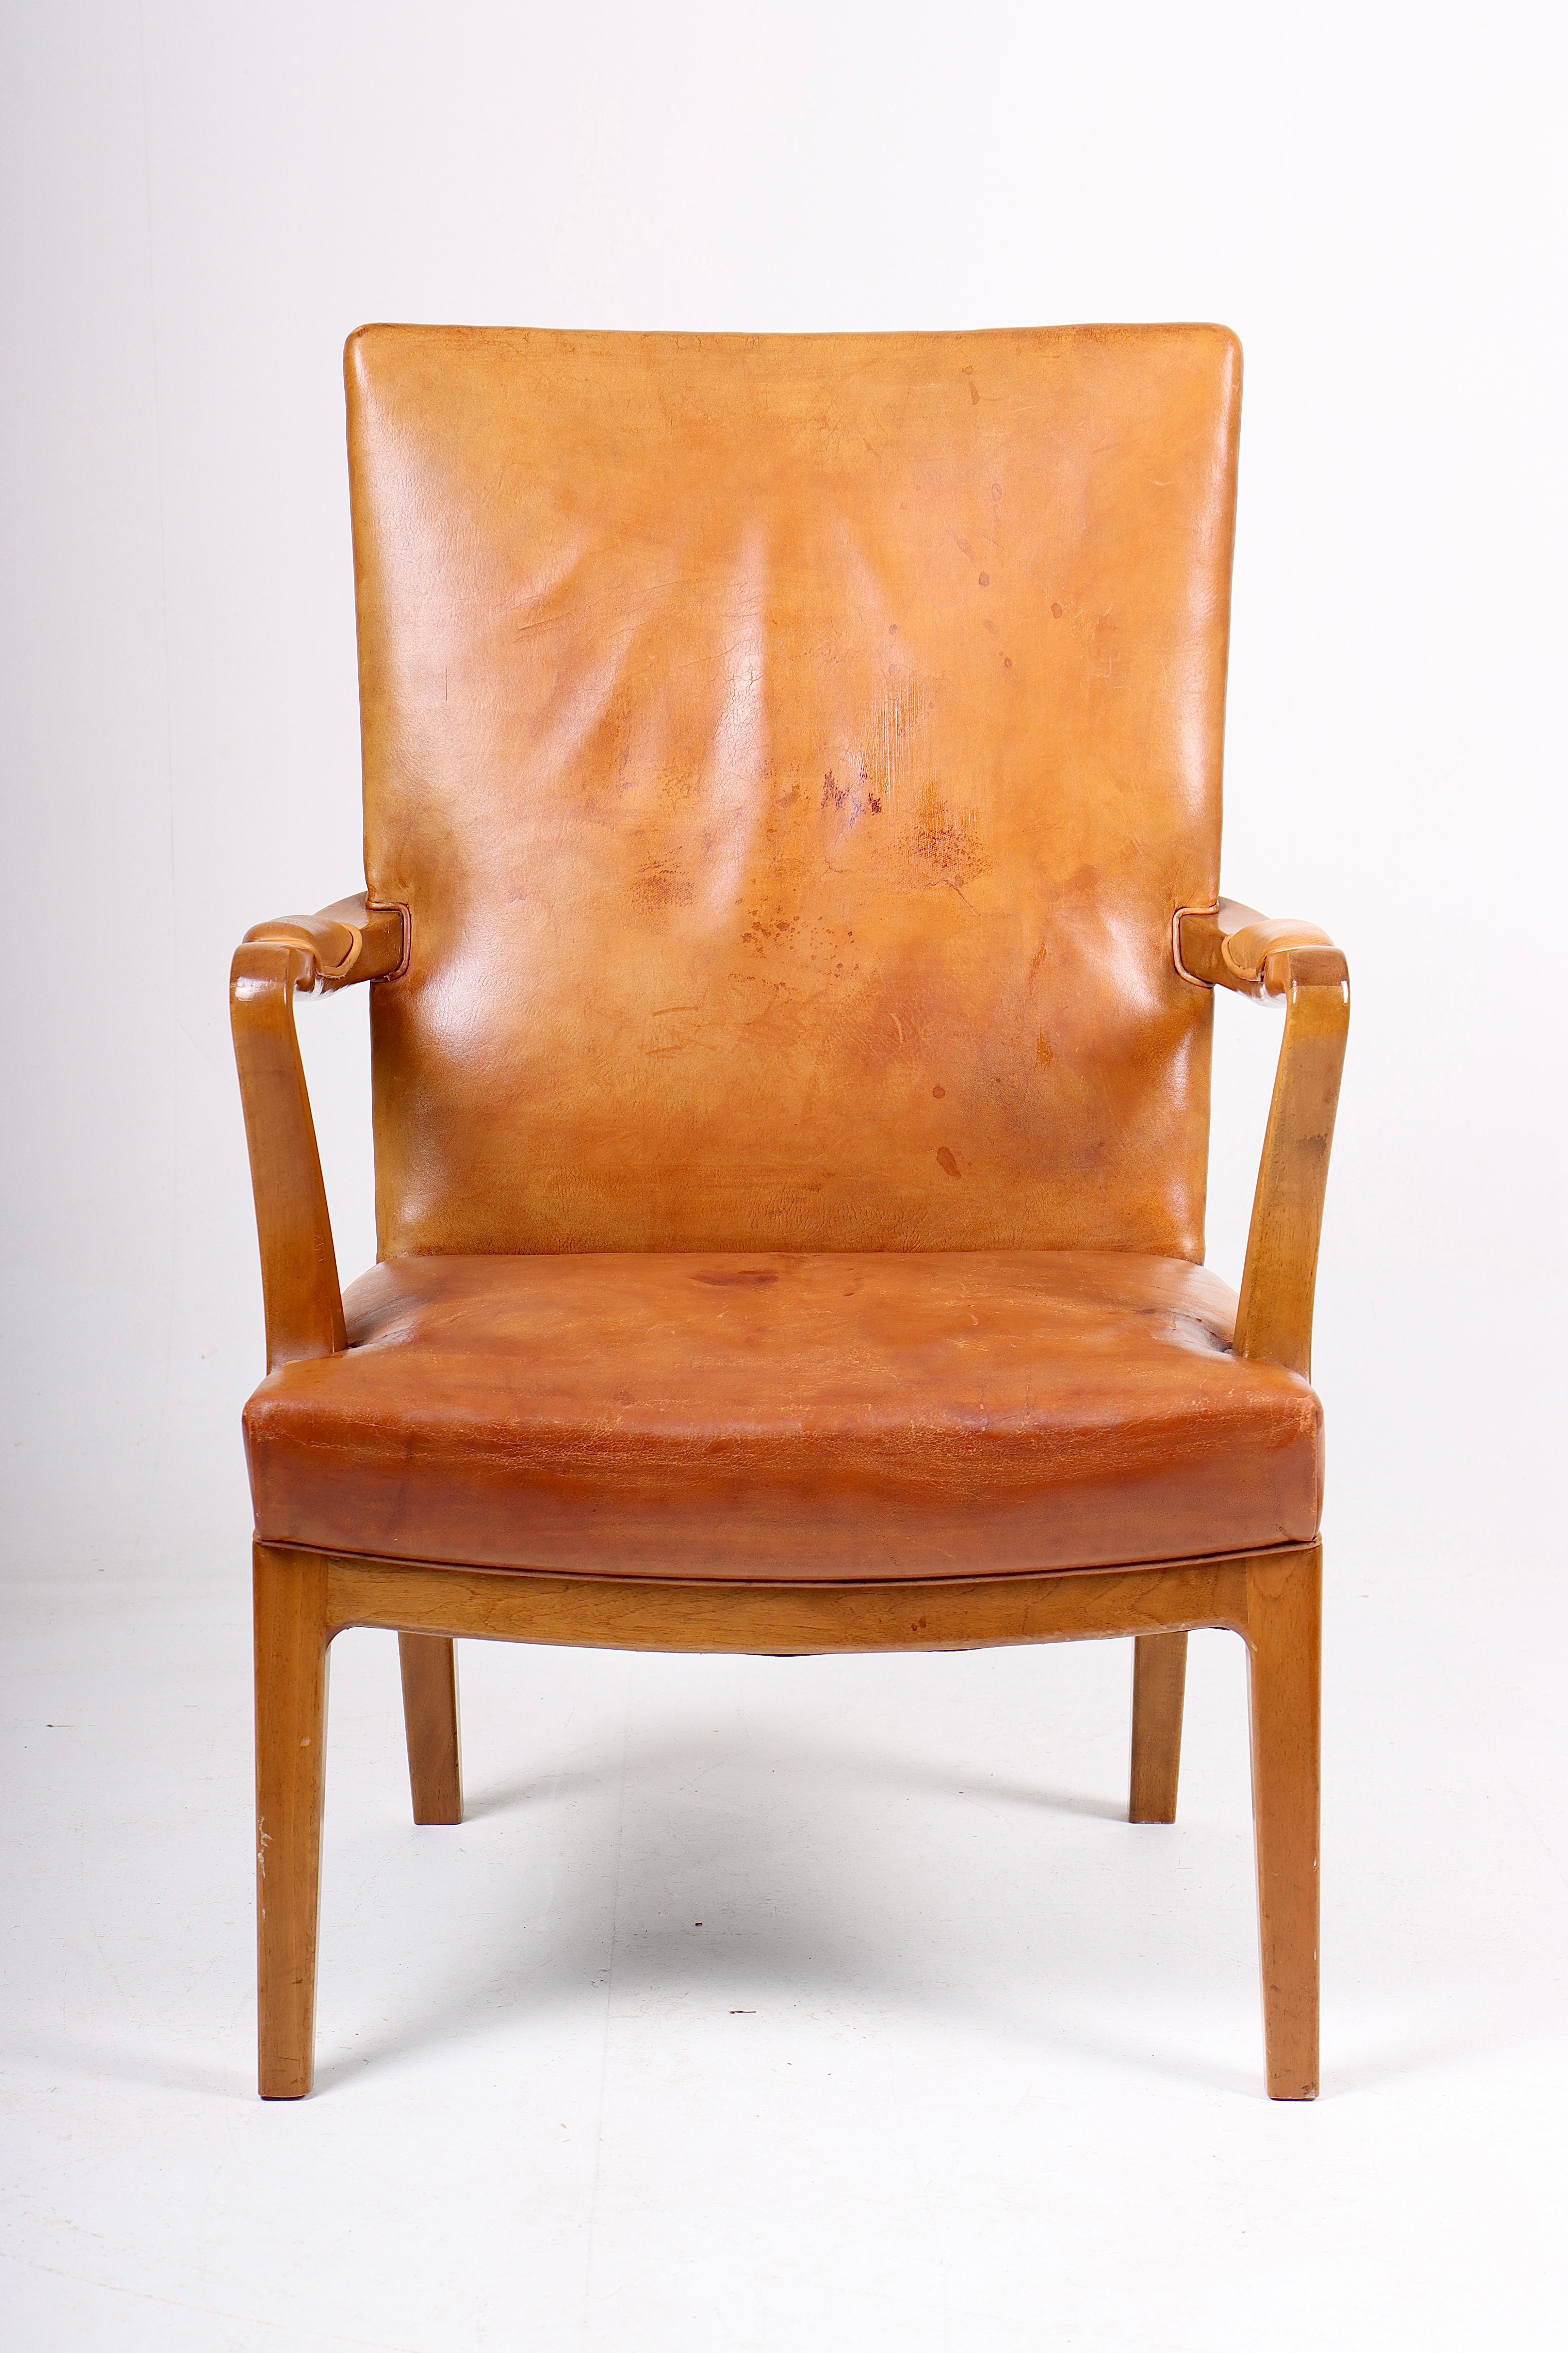 Armchair in patinated leather, made by Lysberg Hansen & Terp in 1940s. Made in Denmark. Great condition.